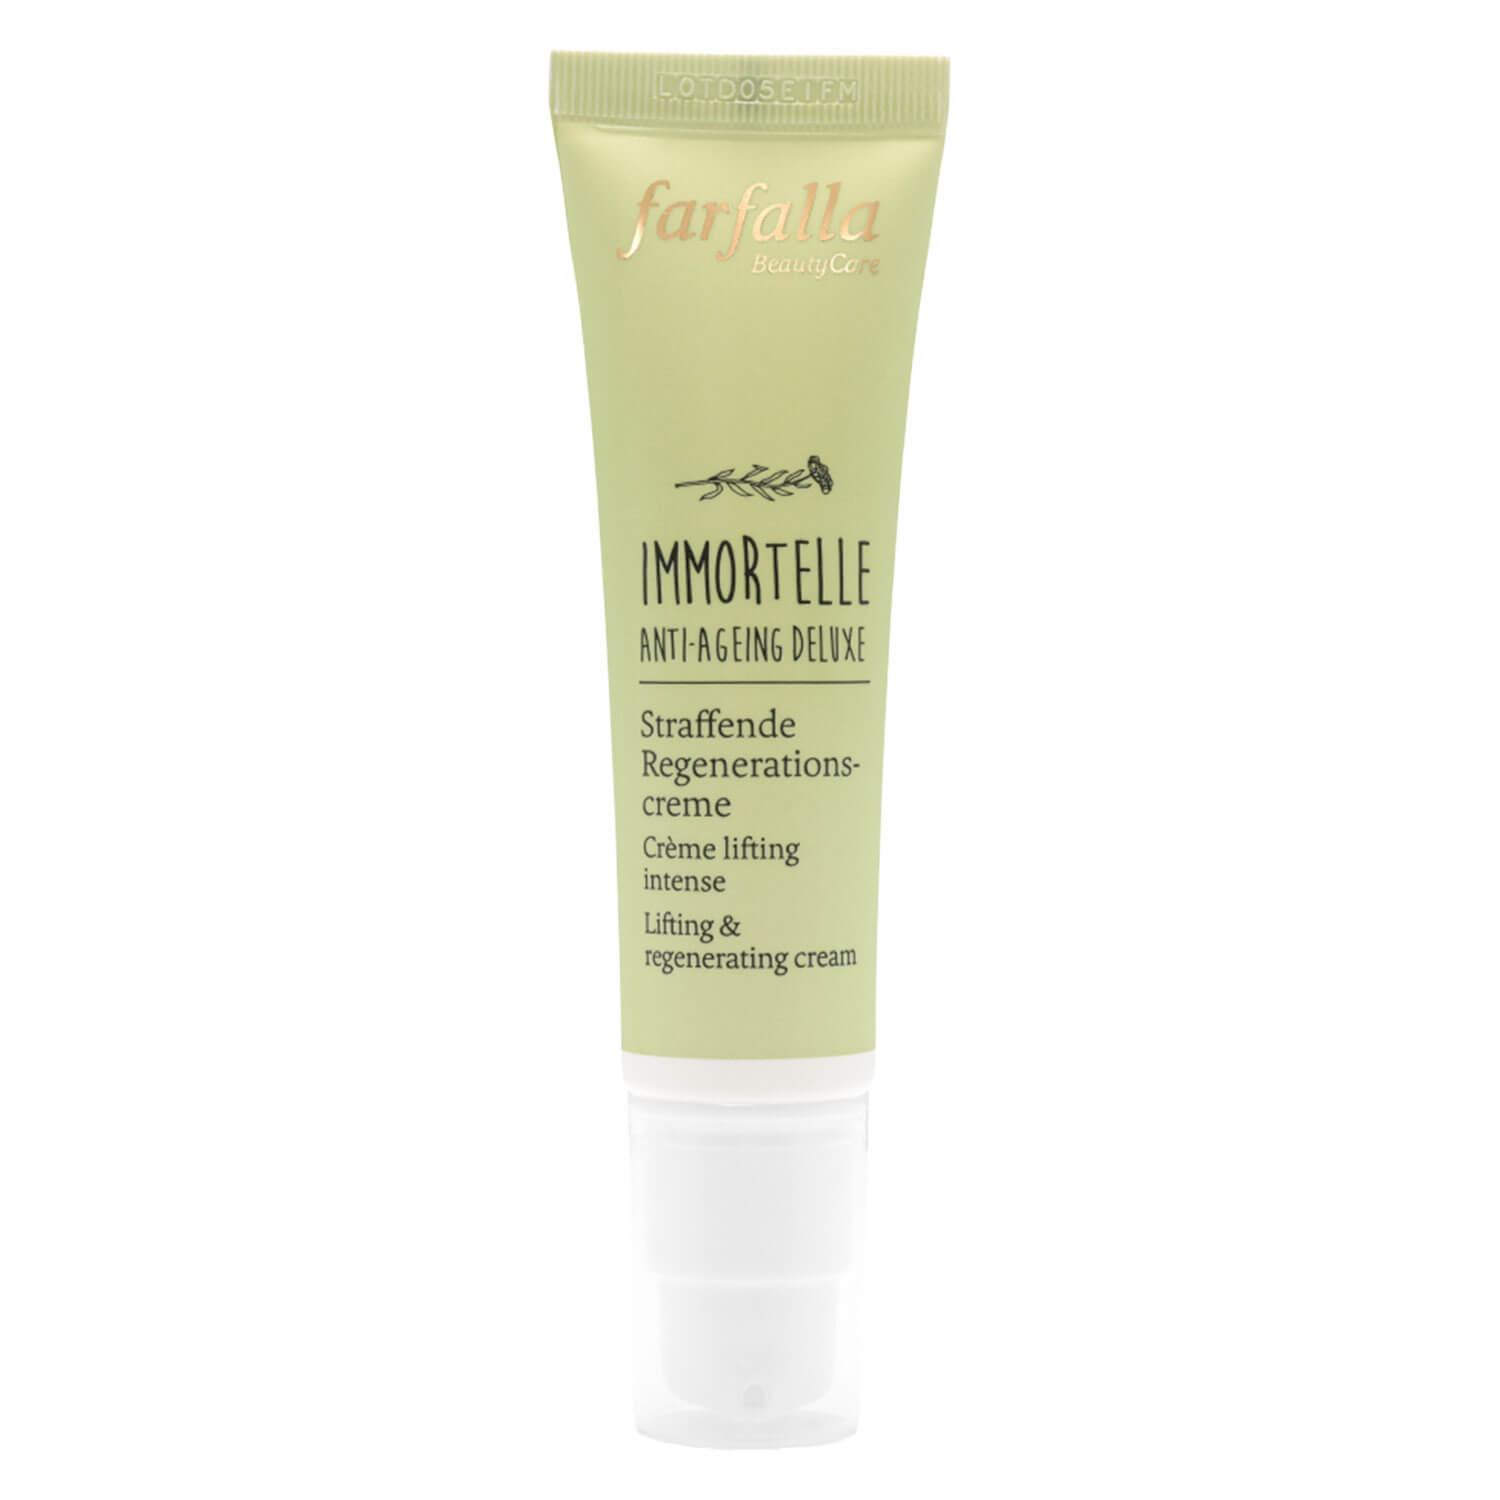 Immortelle Anti-Ageing Deluxe - Crème lifting intense